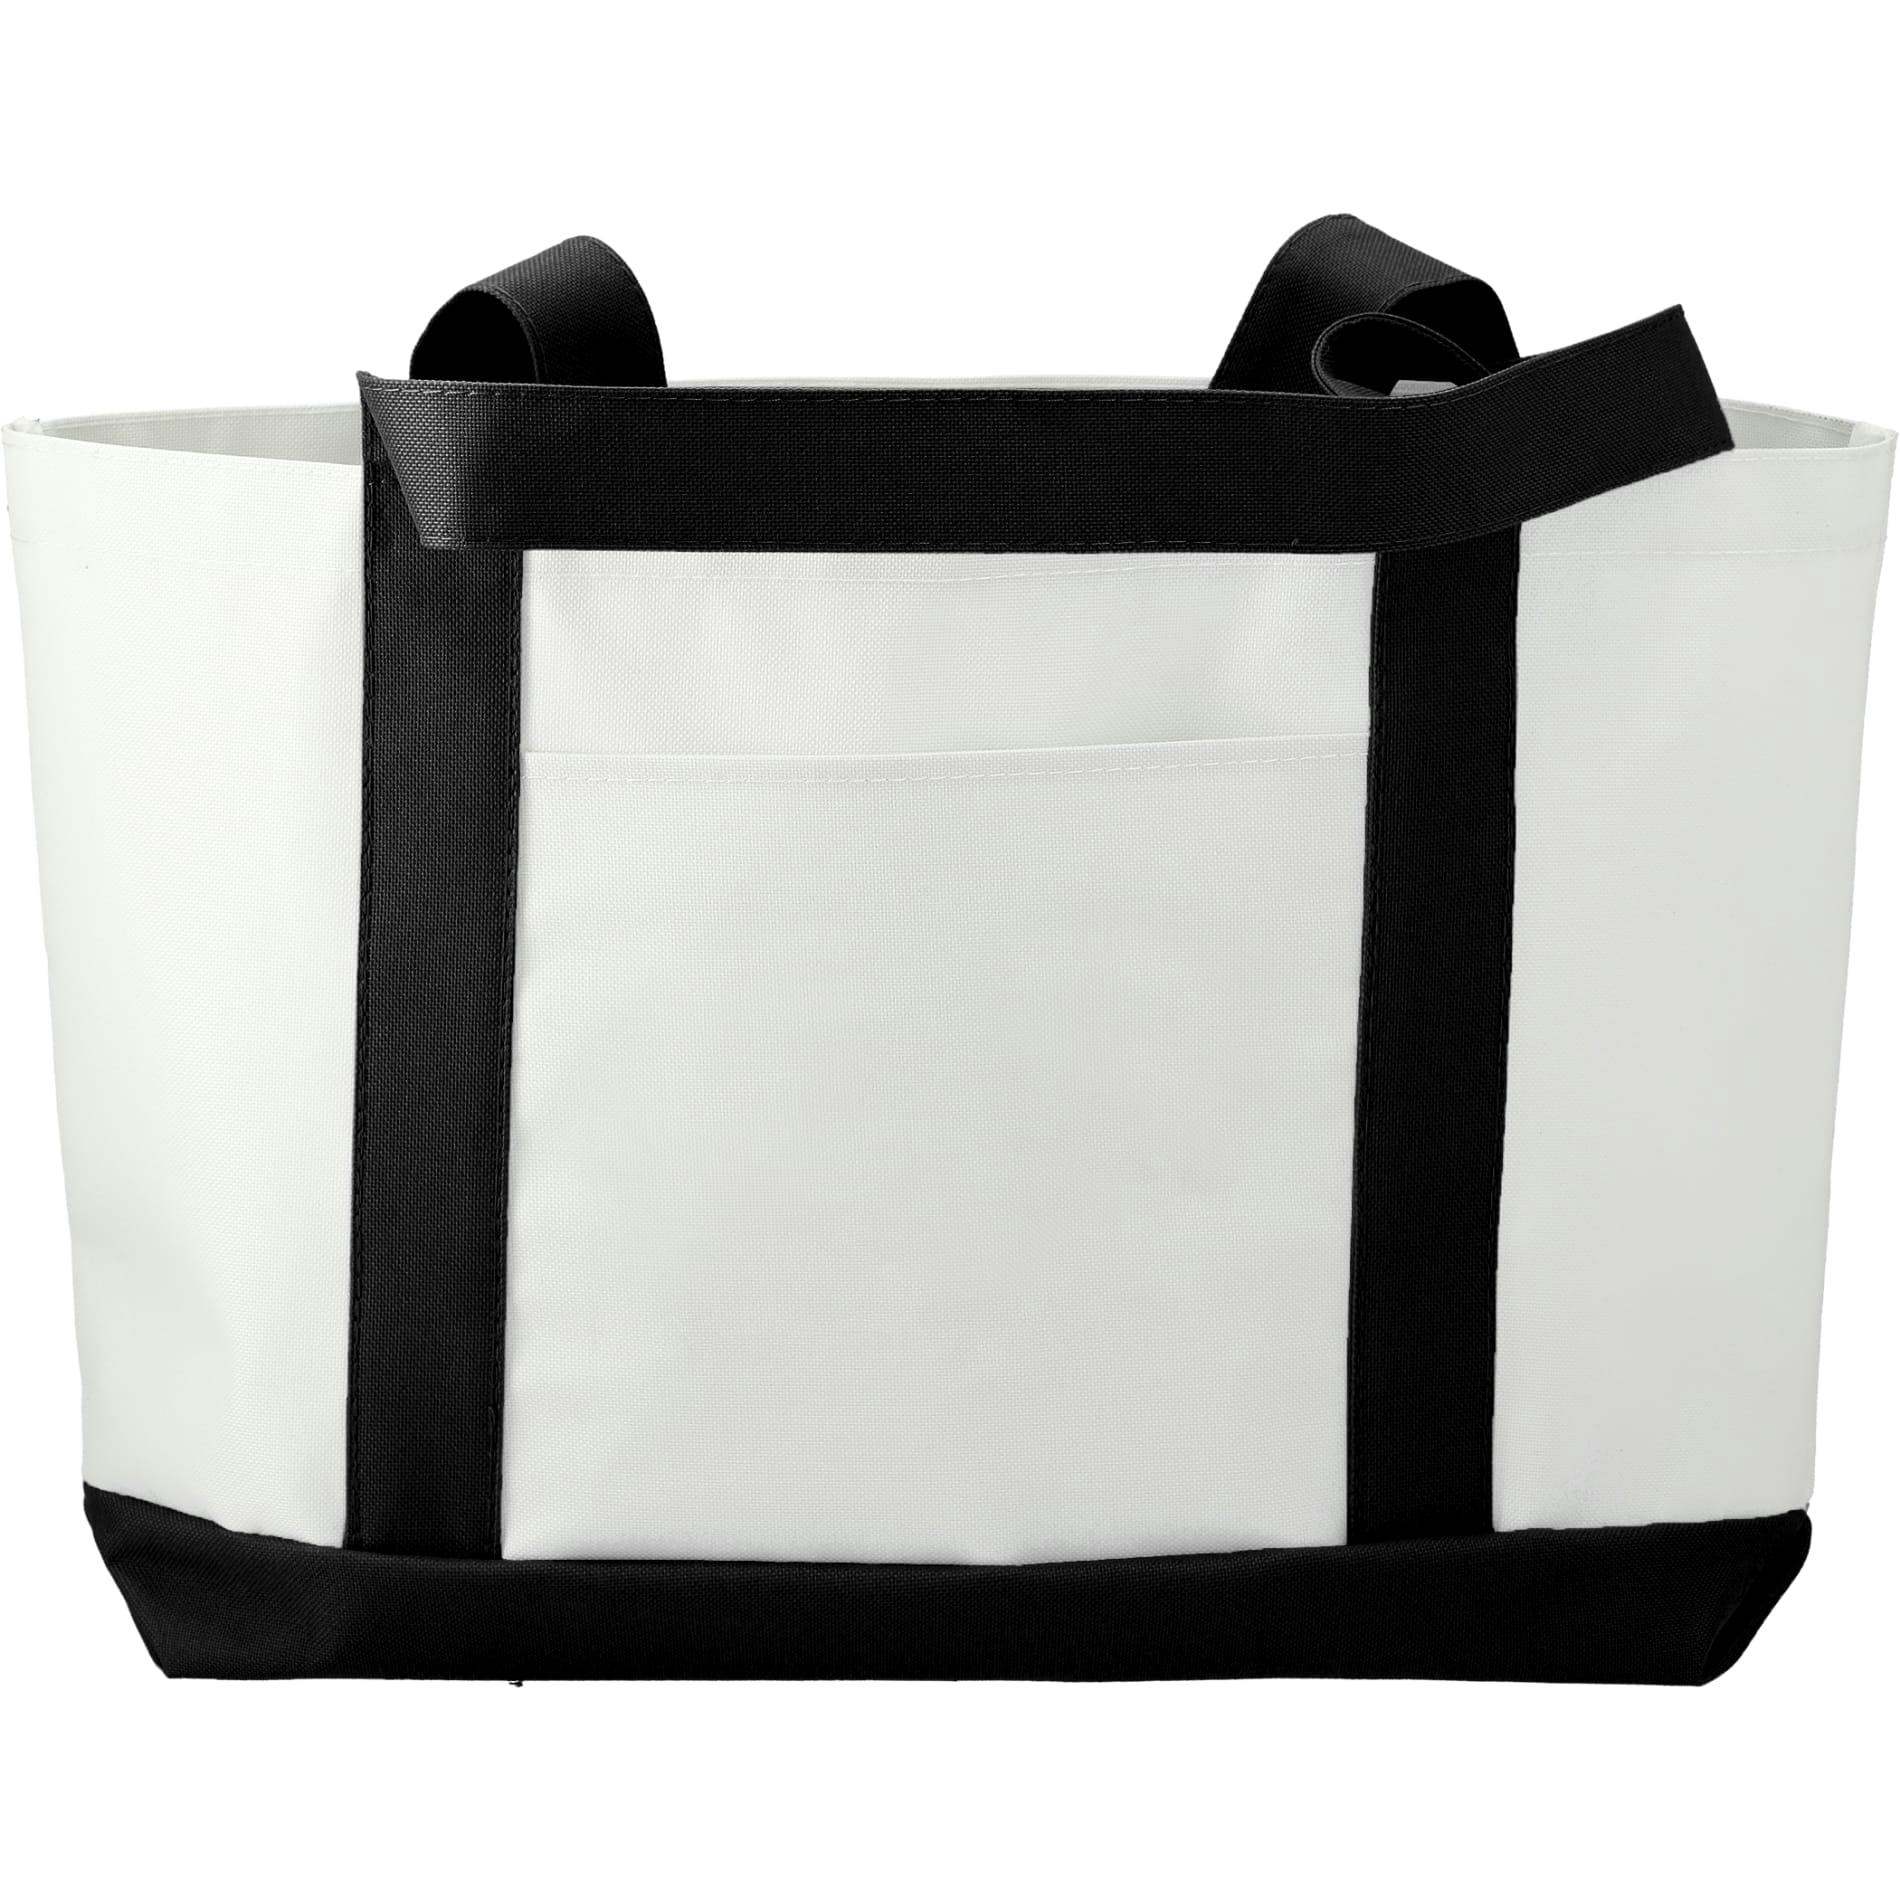 Large Boat Tote - additional Image 1